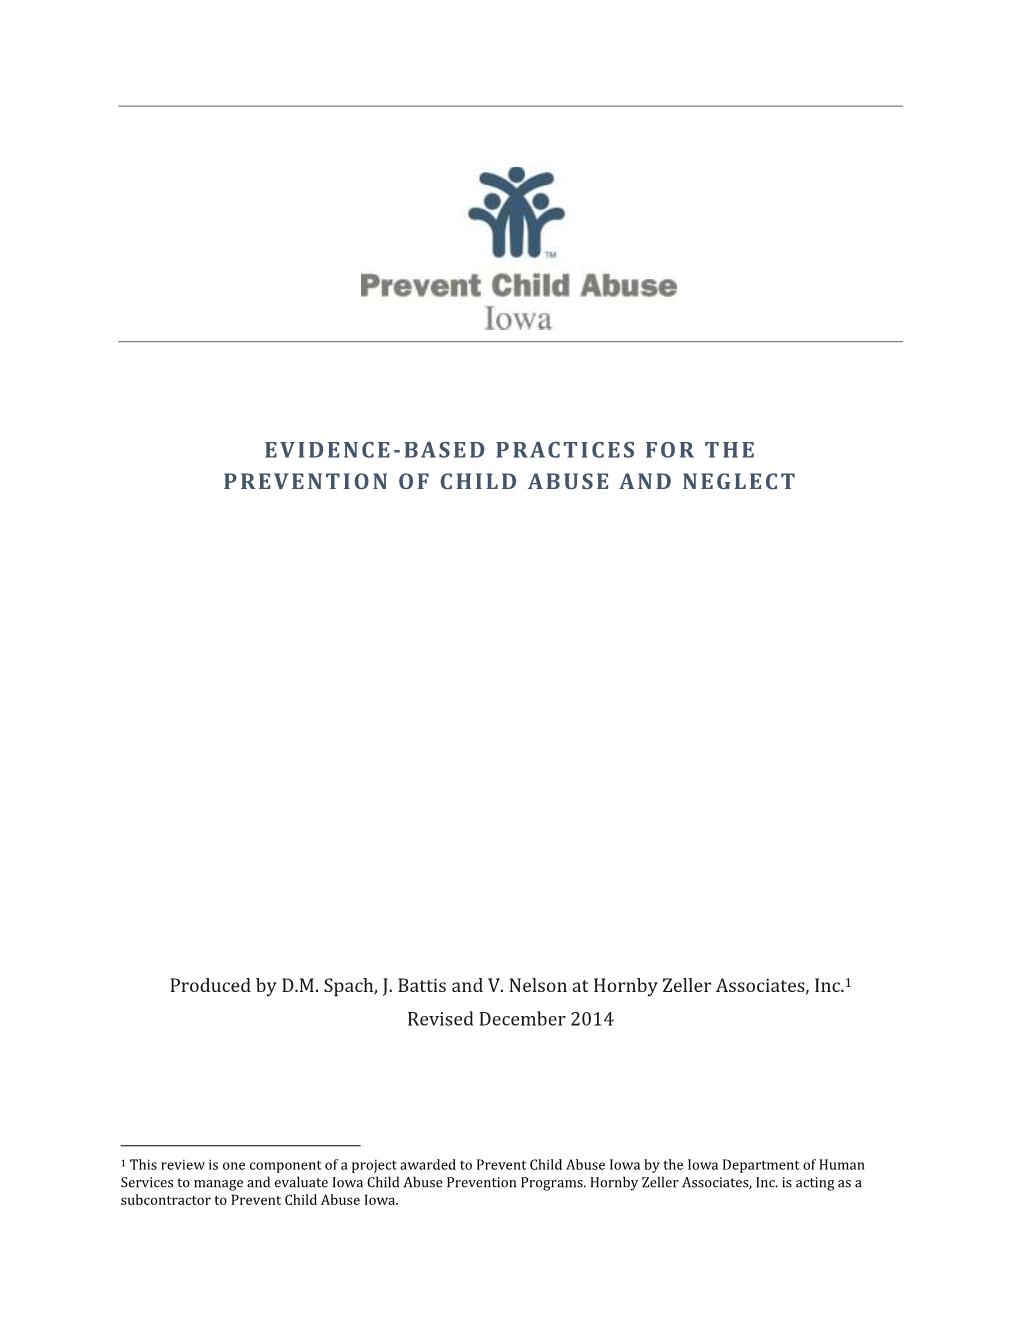 Evidence-Based Practices for the Prevention of Child Abuse and Neglect